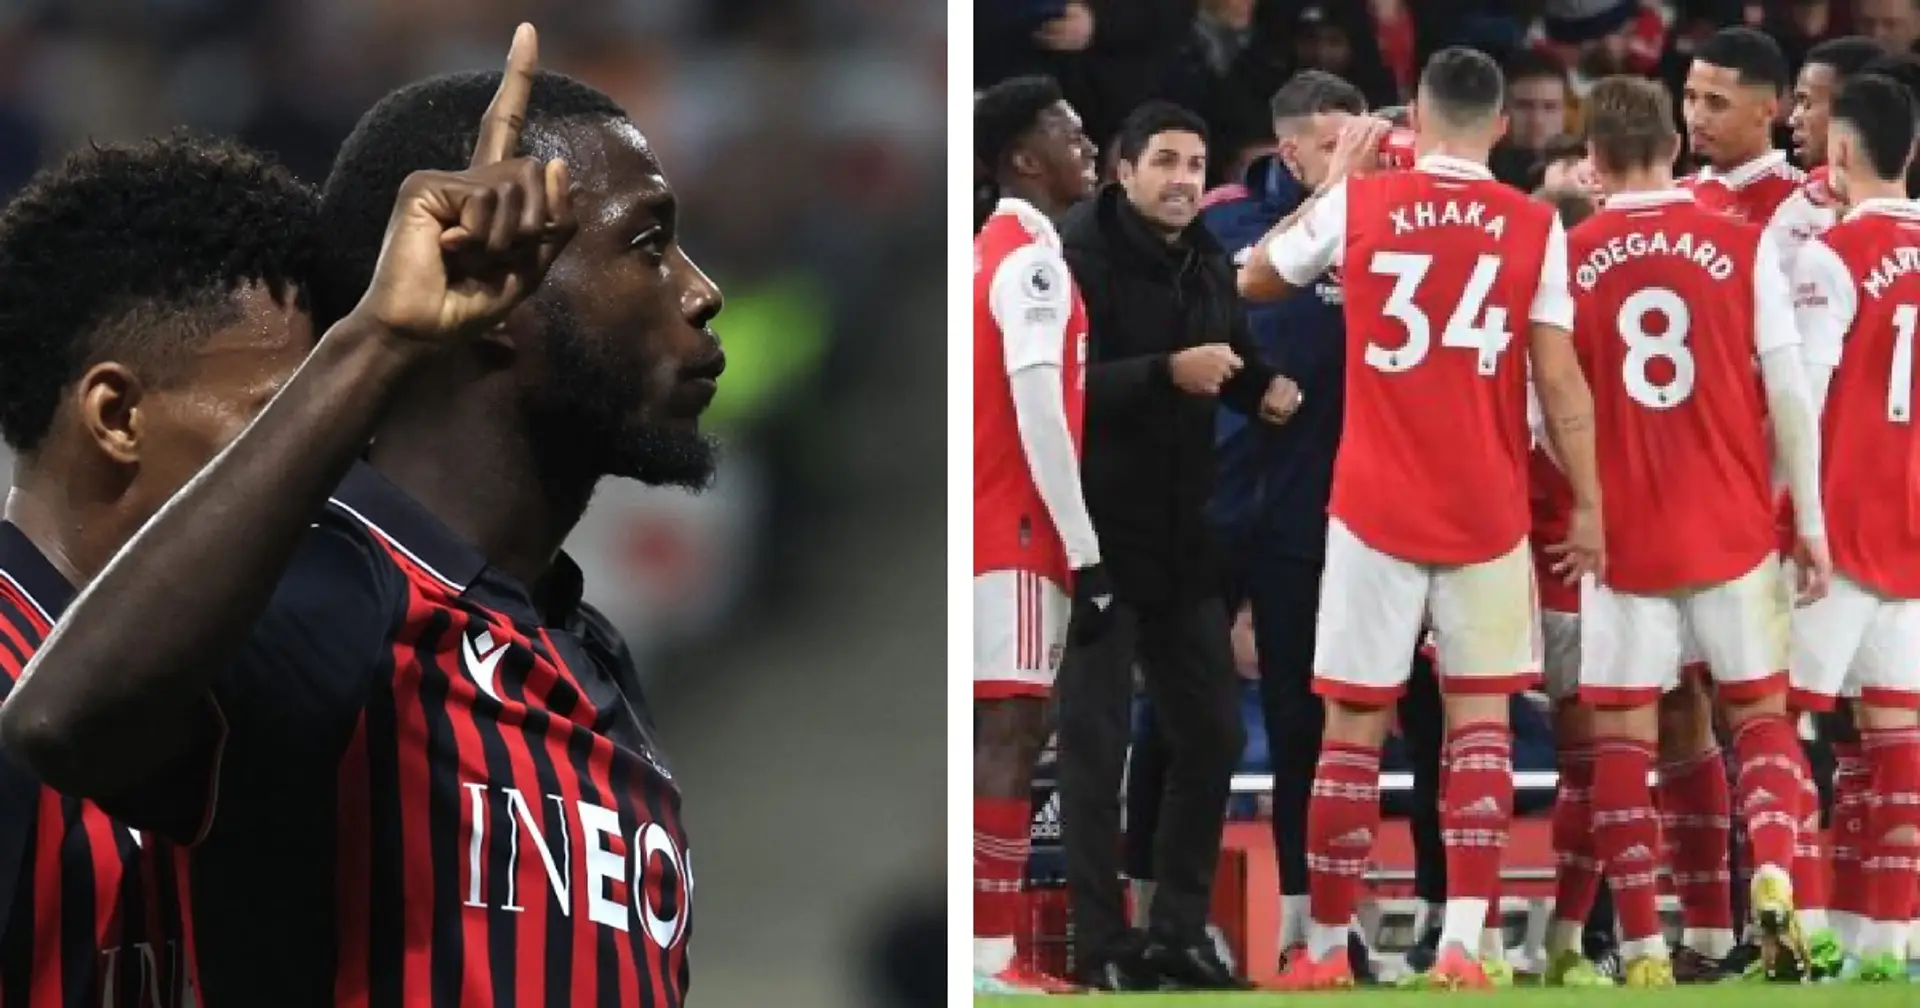 Nicolas Pepe discloses role he could have played at Arsenal this season